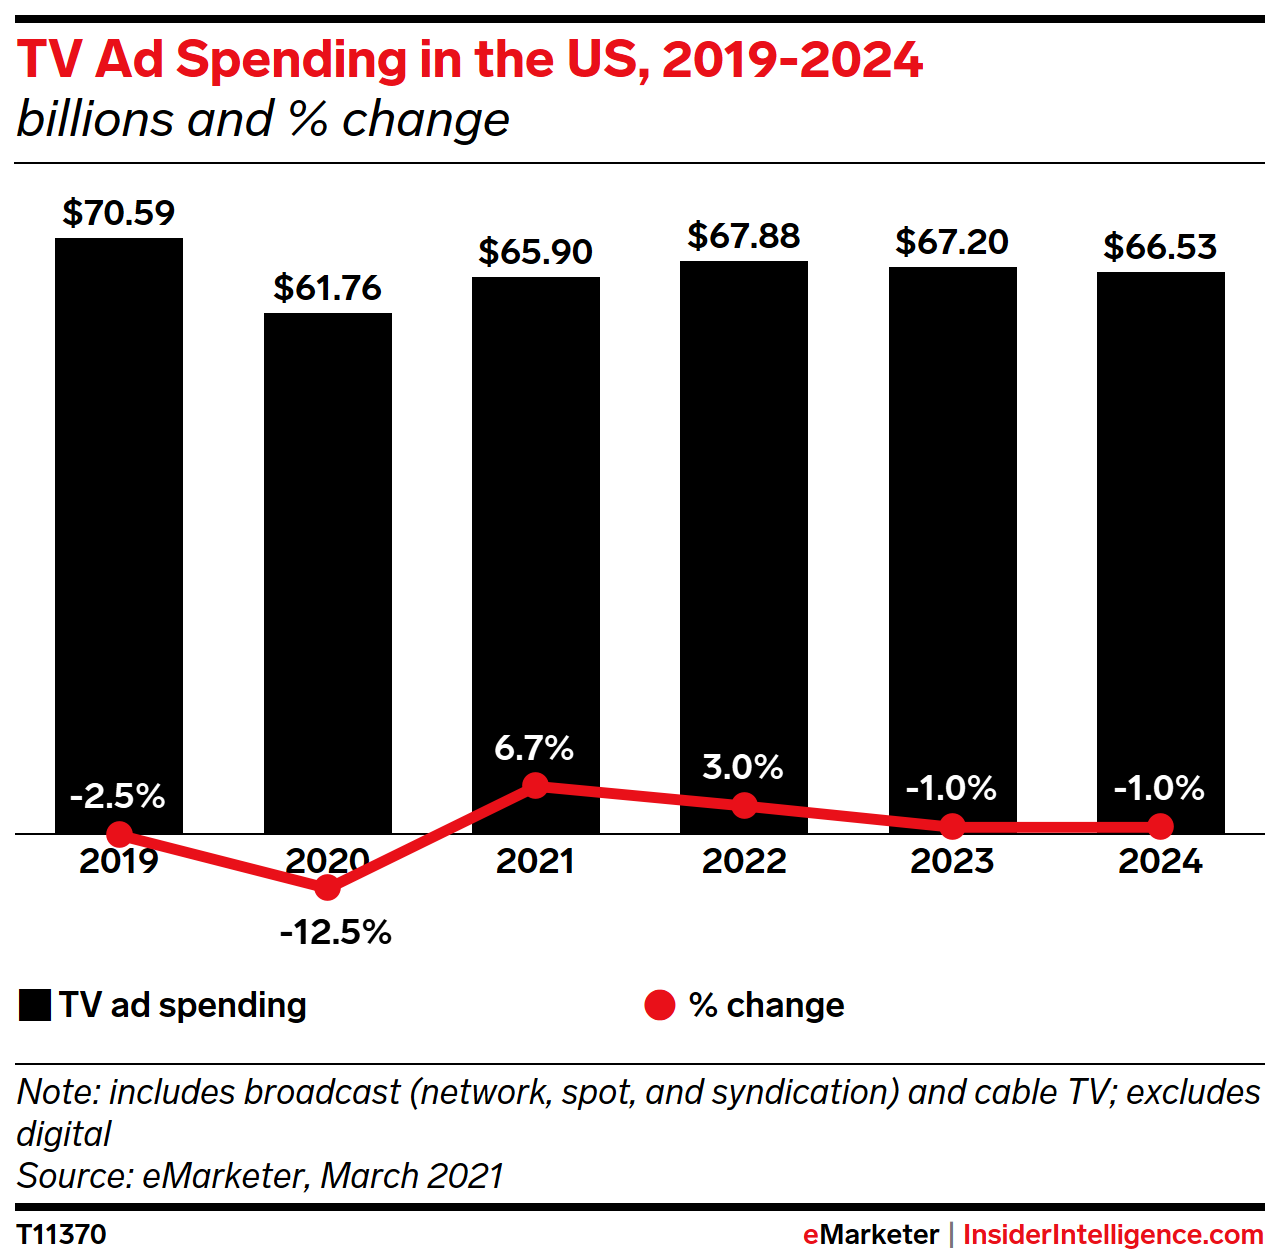 TV Ad Spending in the US, 2019-2024 (billions and % change)